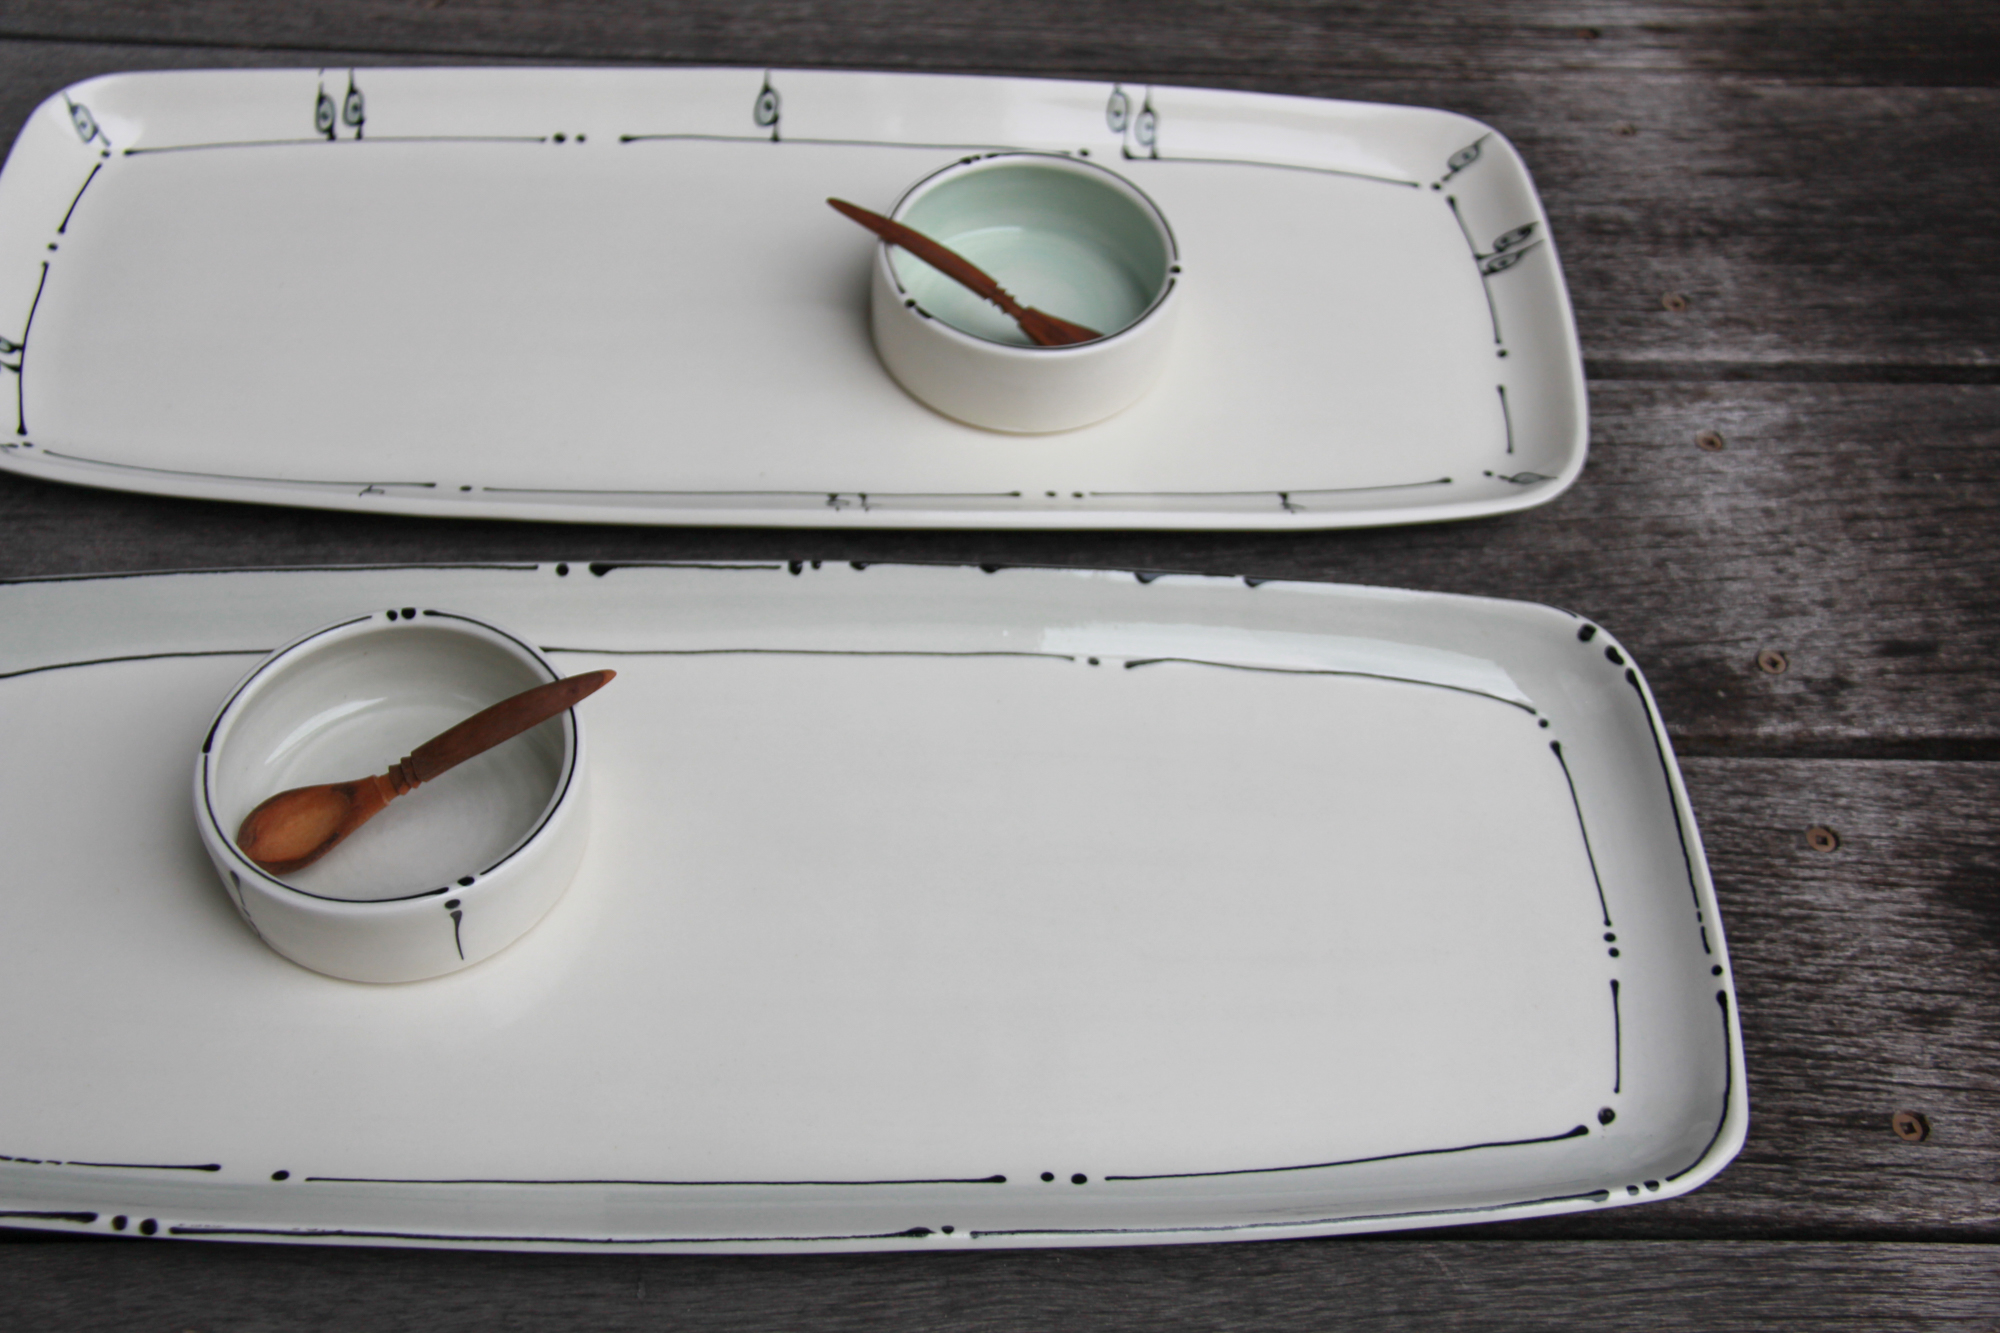 Iris Dorton: Large Tray with Circle Dot Motif, comes with Wood Spoon and Dish Product Image 4 of 7